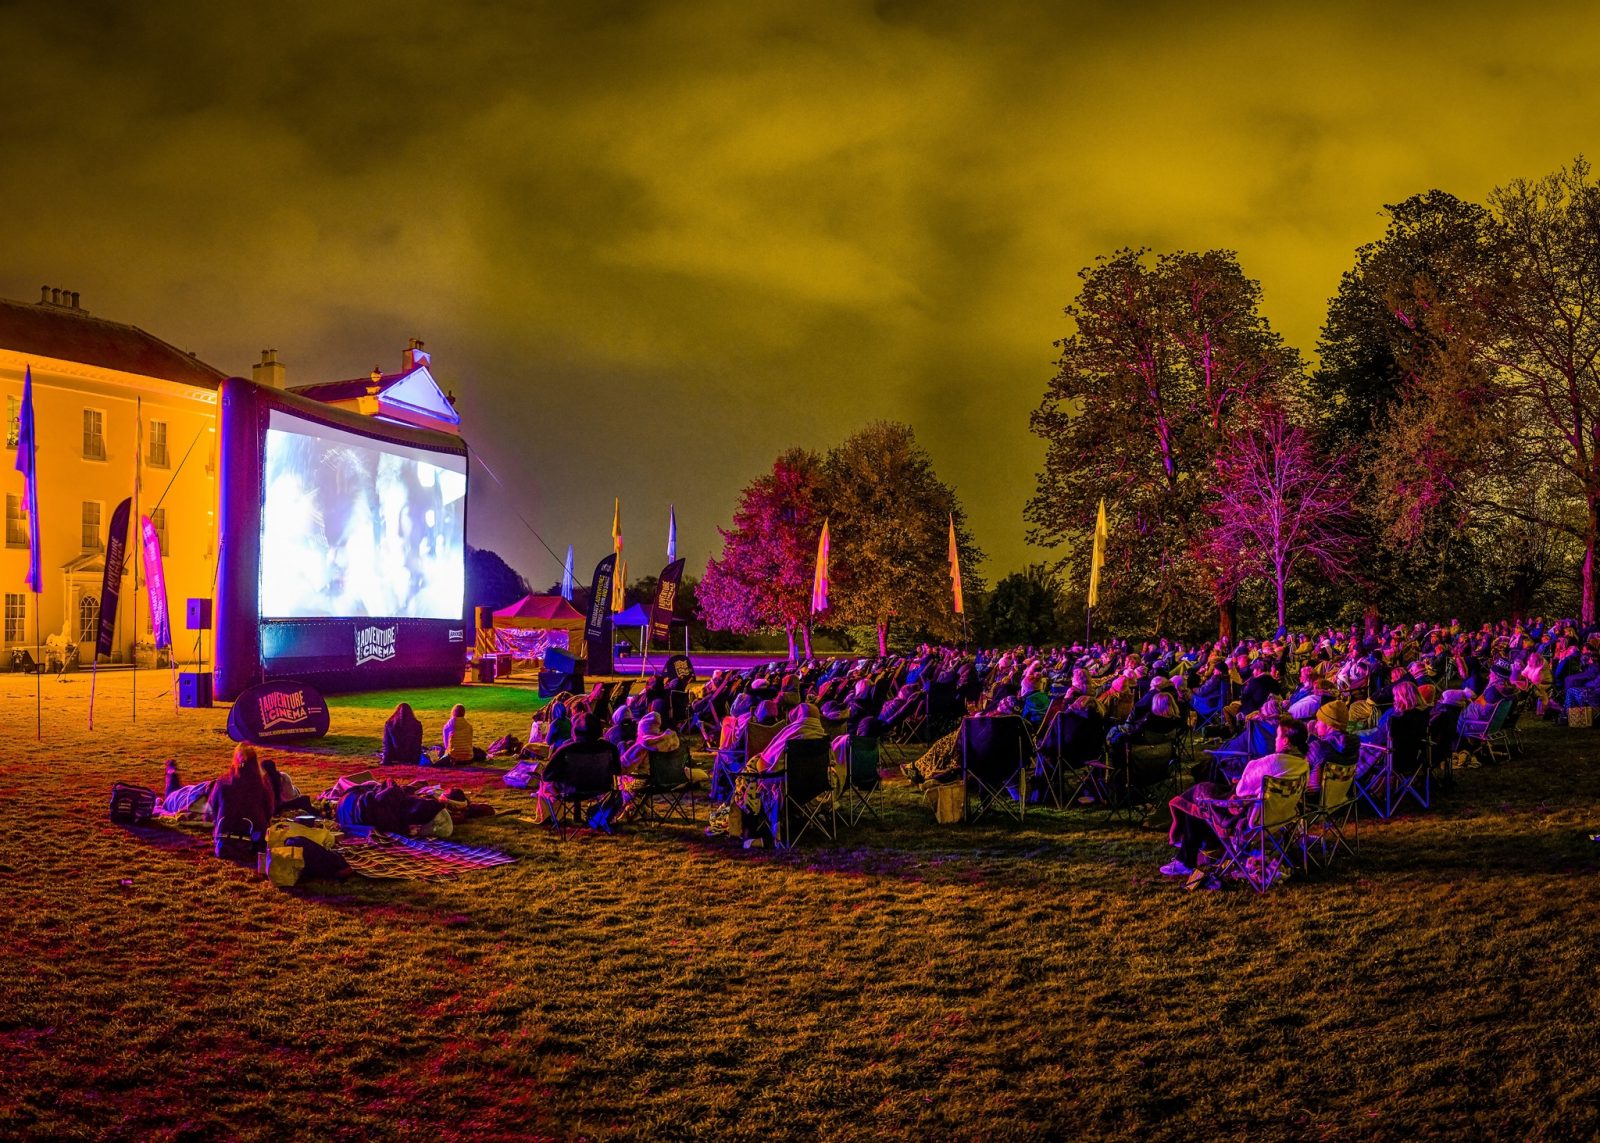 Open-air cinema event in the night time. 